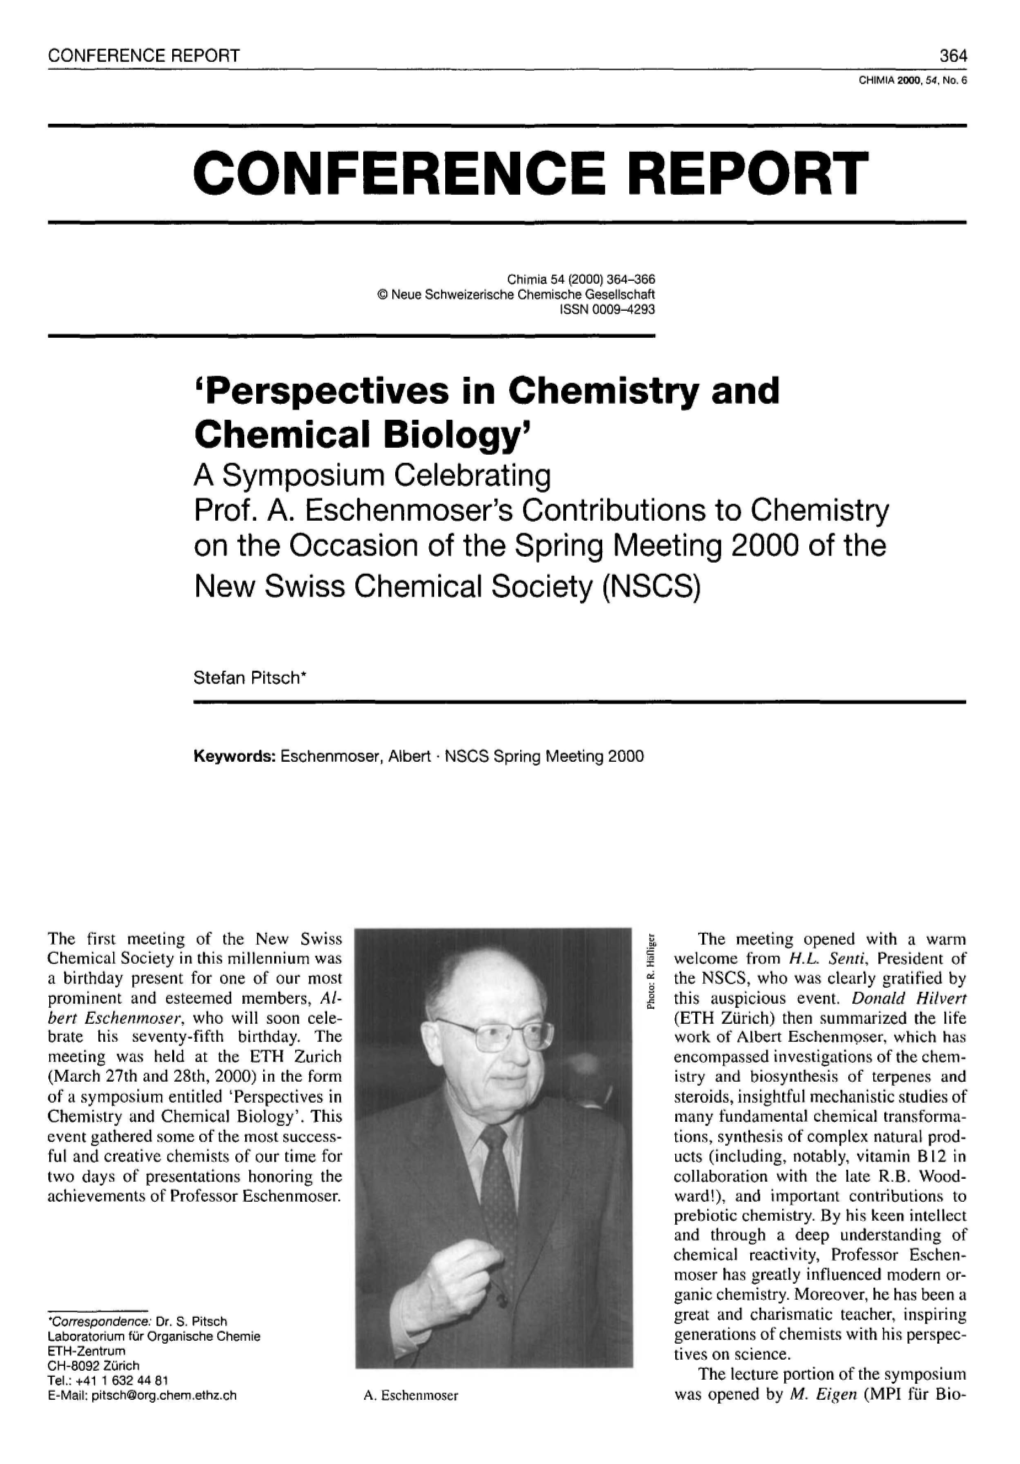 Perspectives in Chemistry and Chemical Biology' a Symposium Celebrating Prof